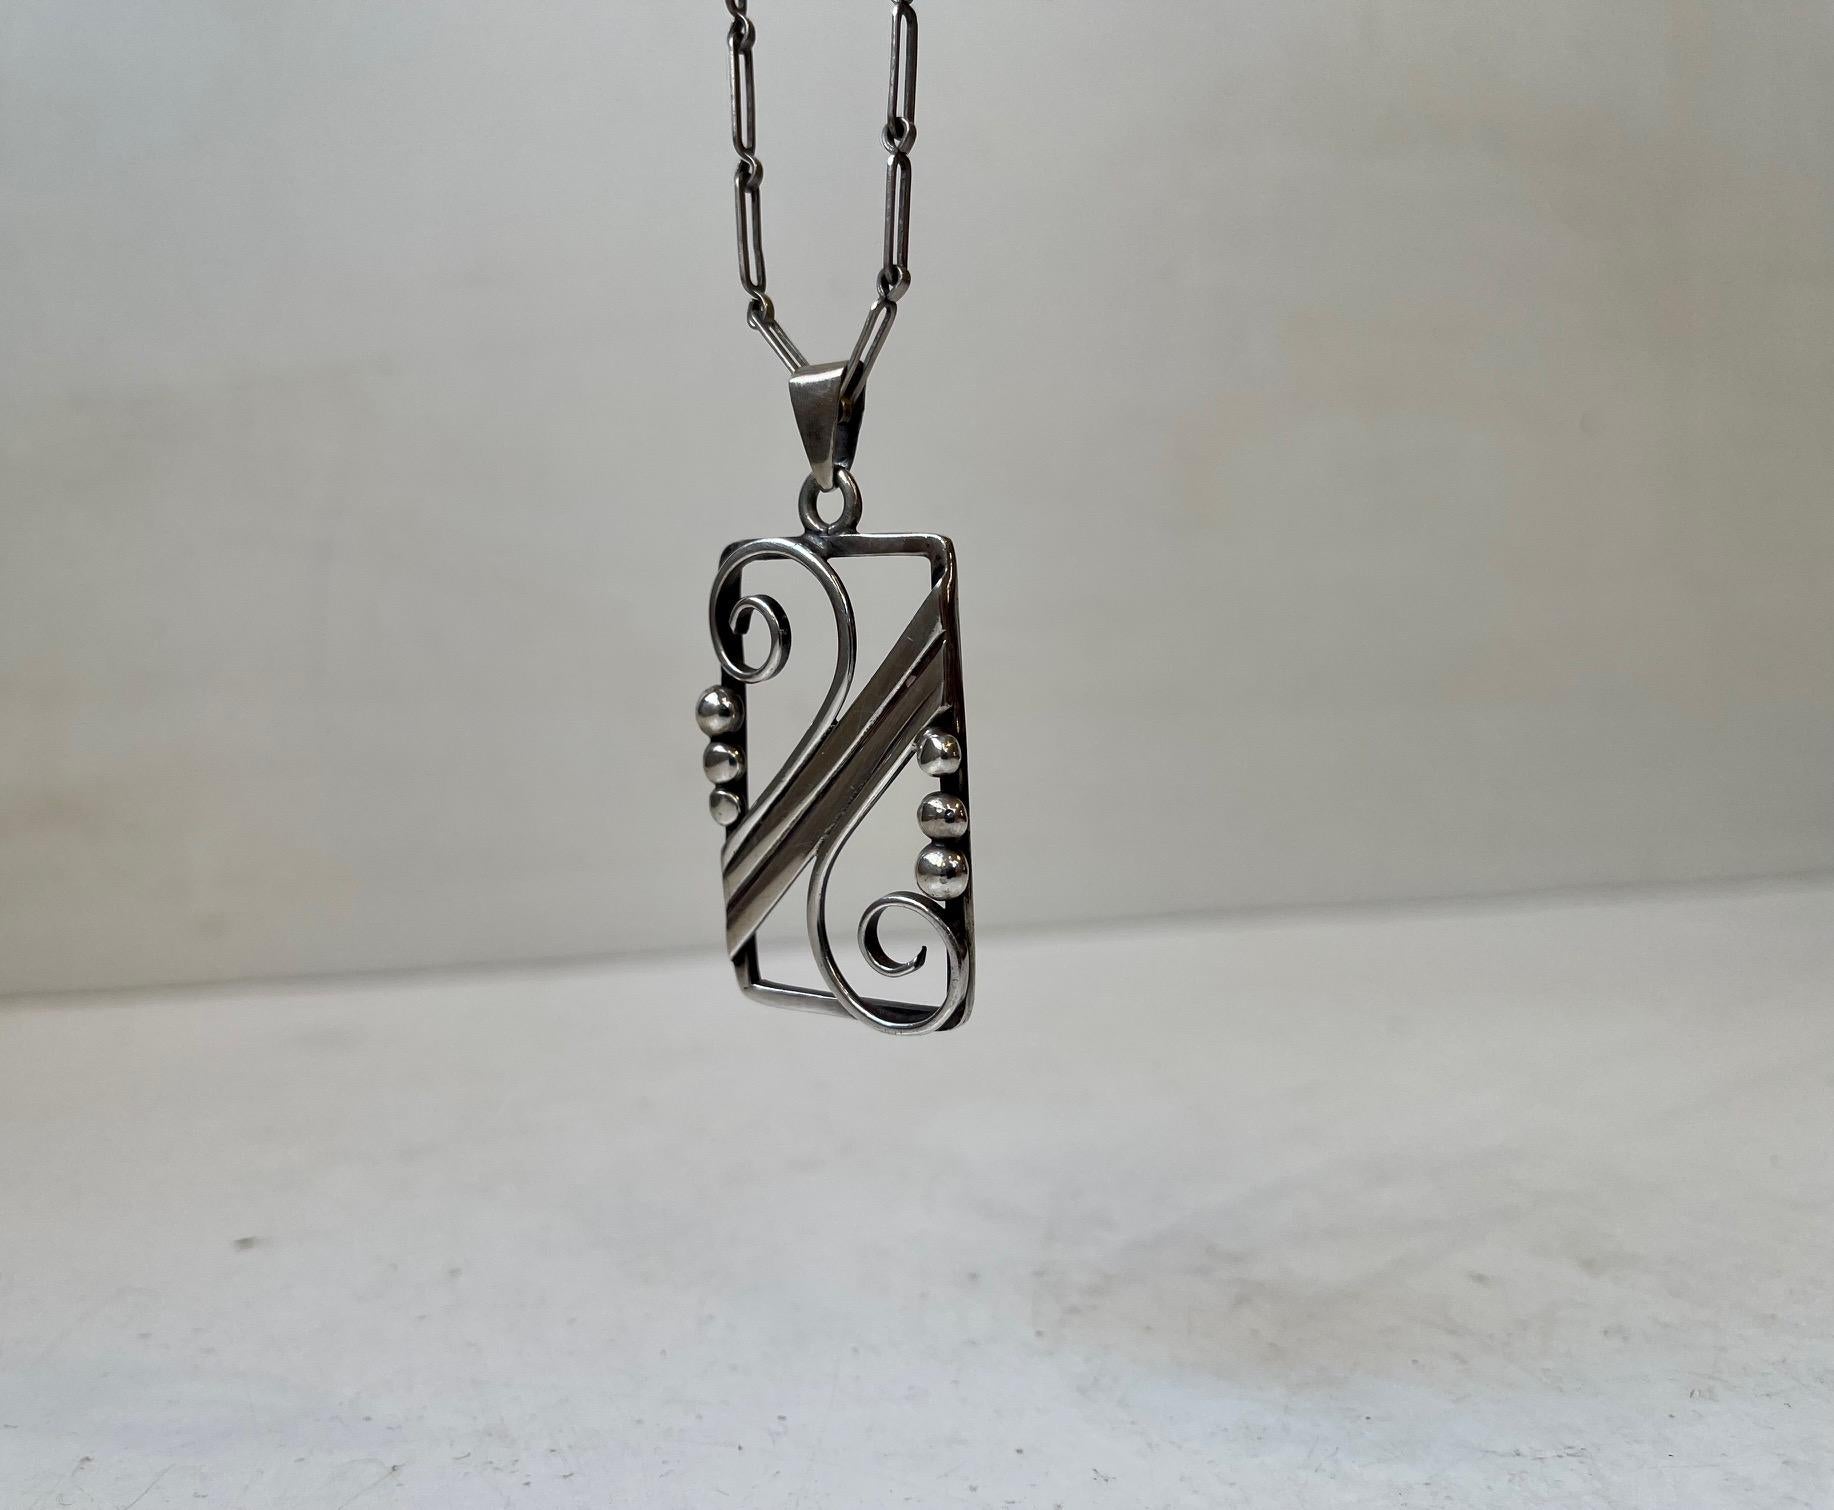 Early 20th Century Antique Jugend, Art Nouveau Pendant Necklace in Silver by F. Bang Denmark For Sale